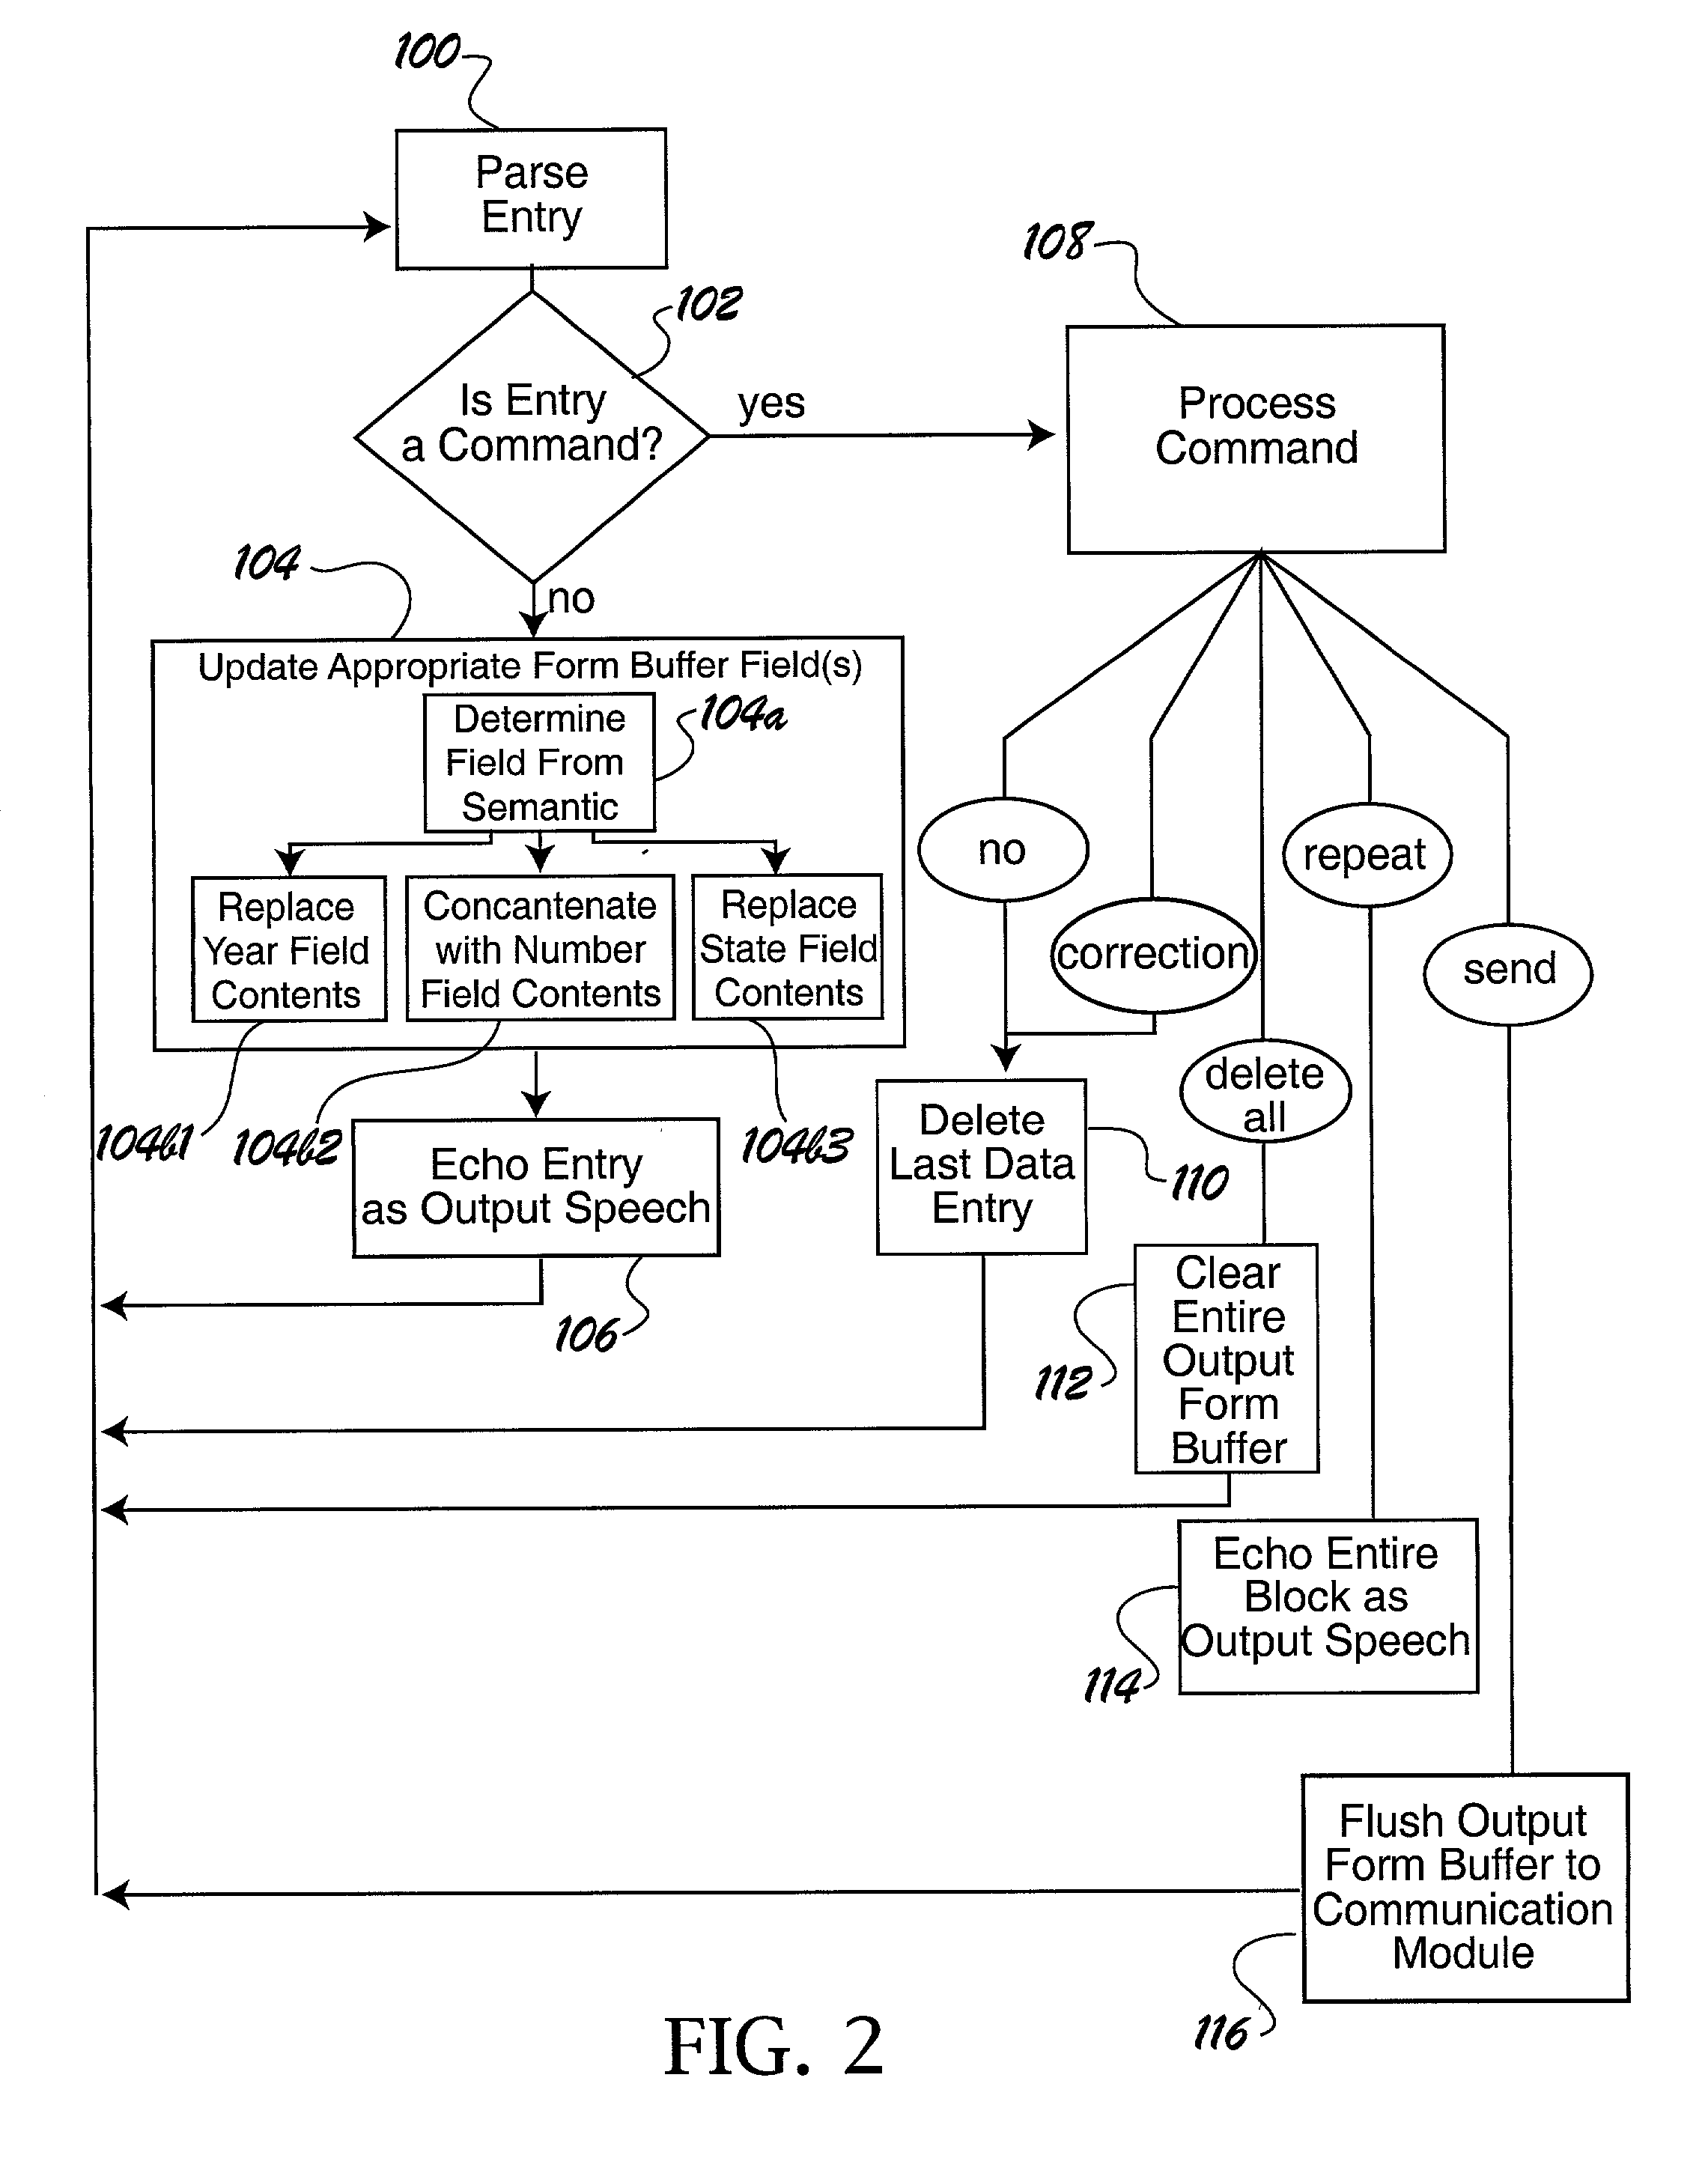 Method for efficient, safe and reliable data entry by voice under adverse conditions